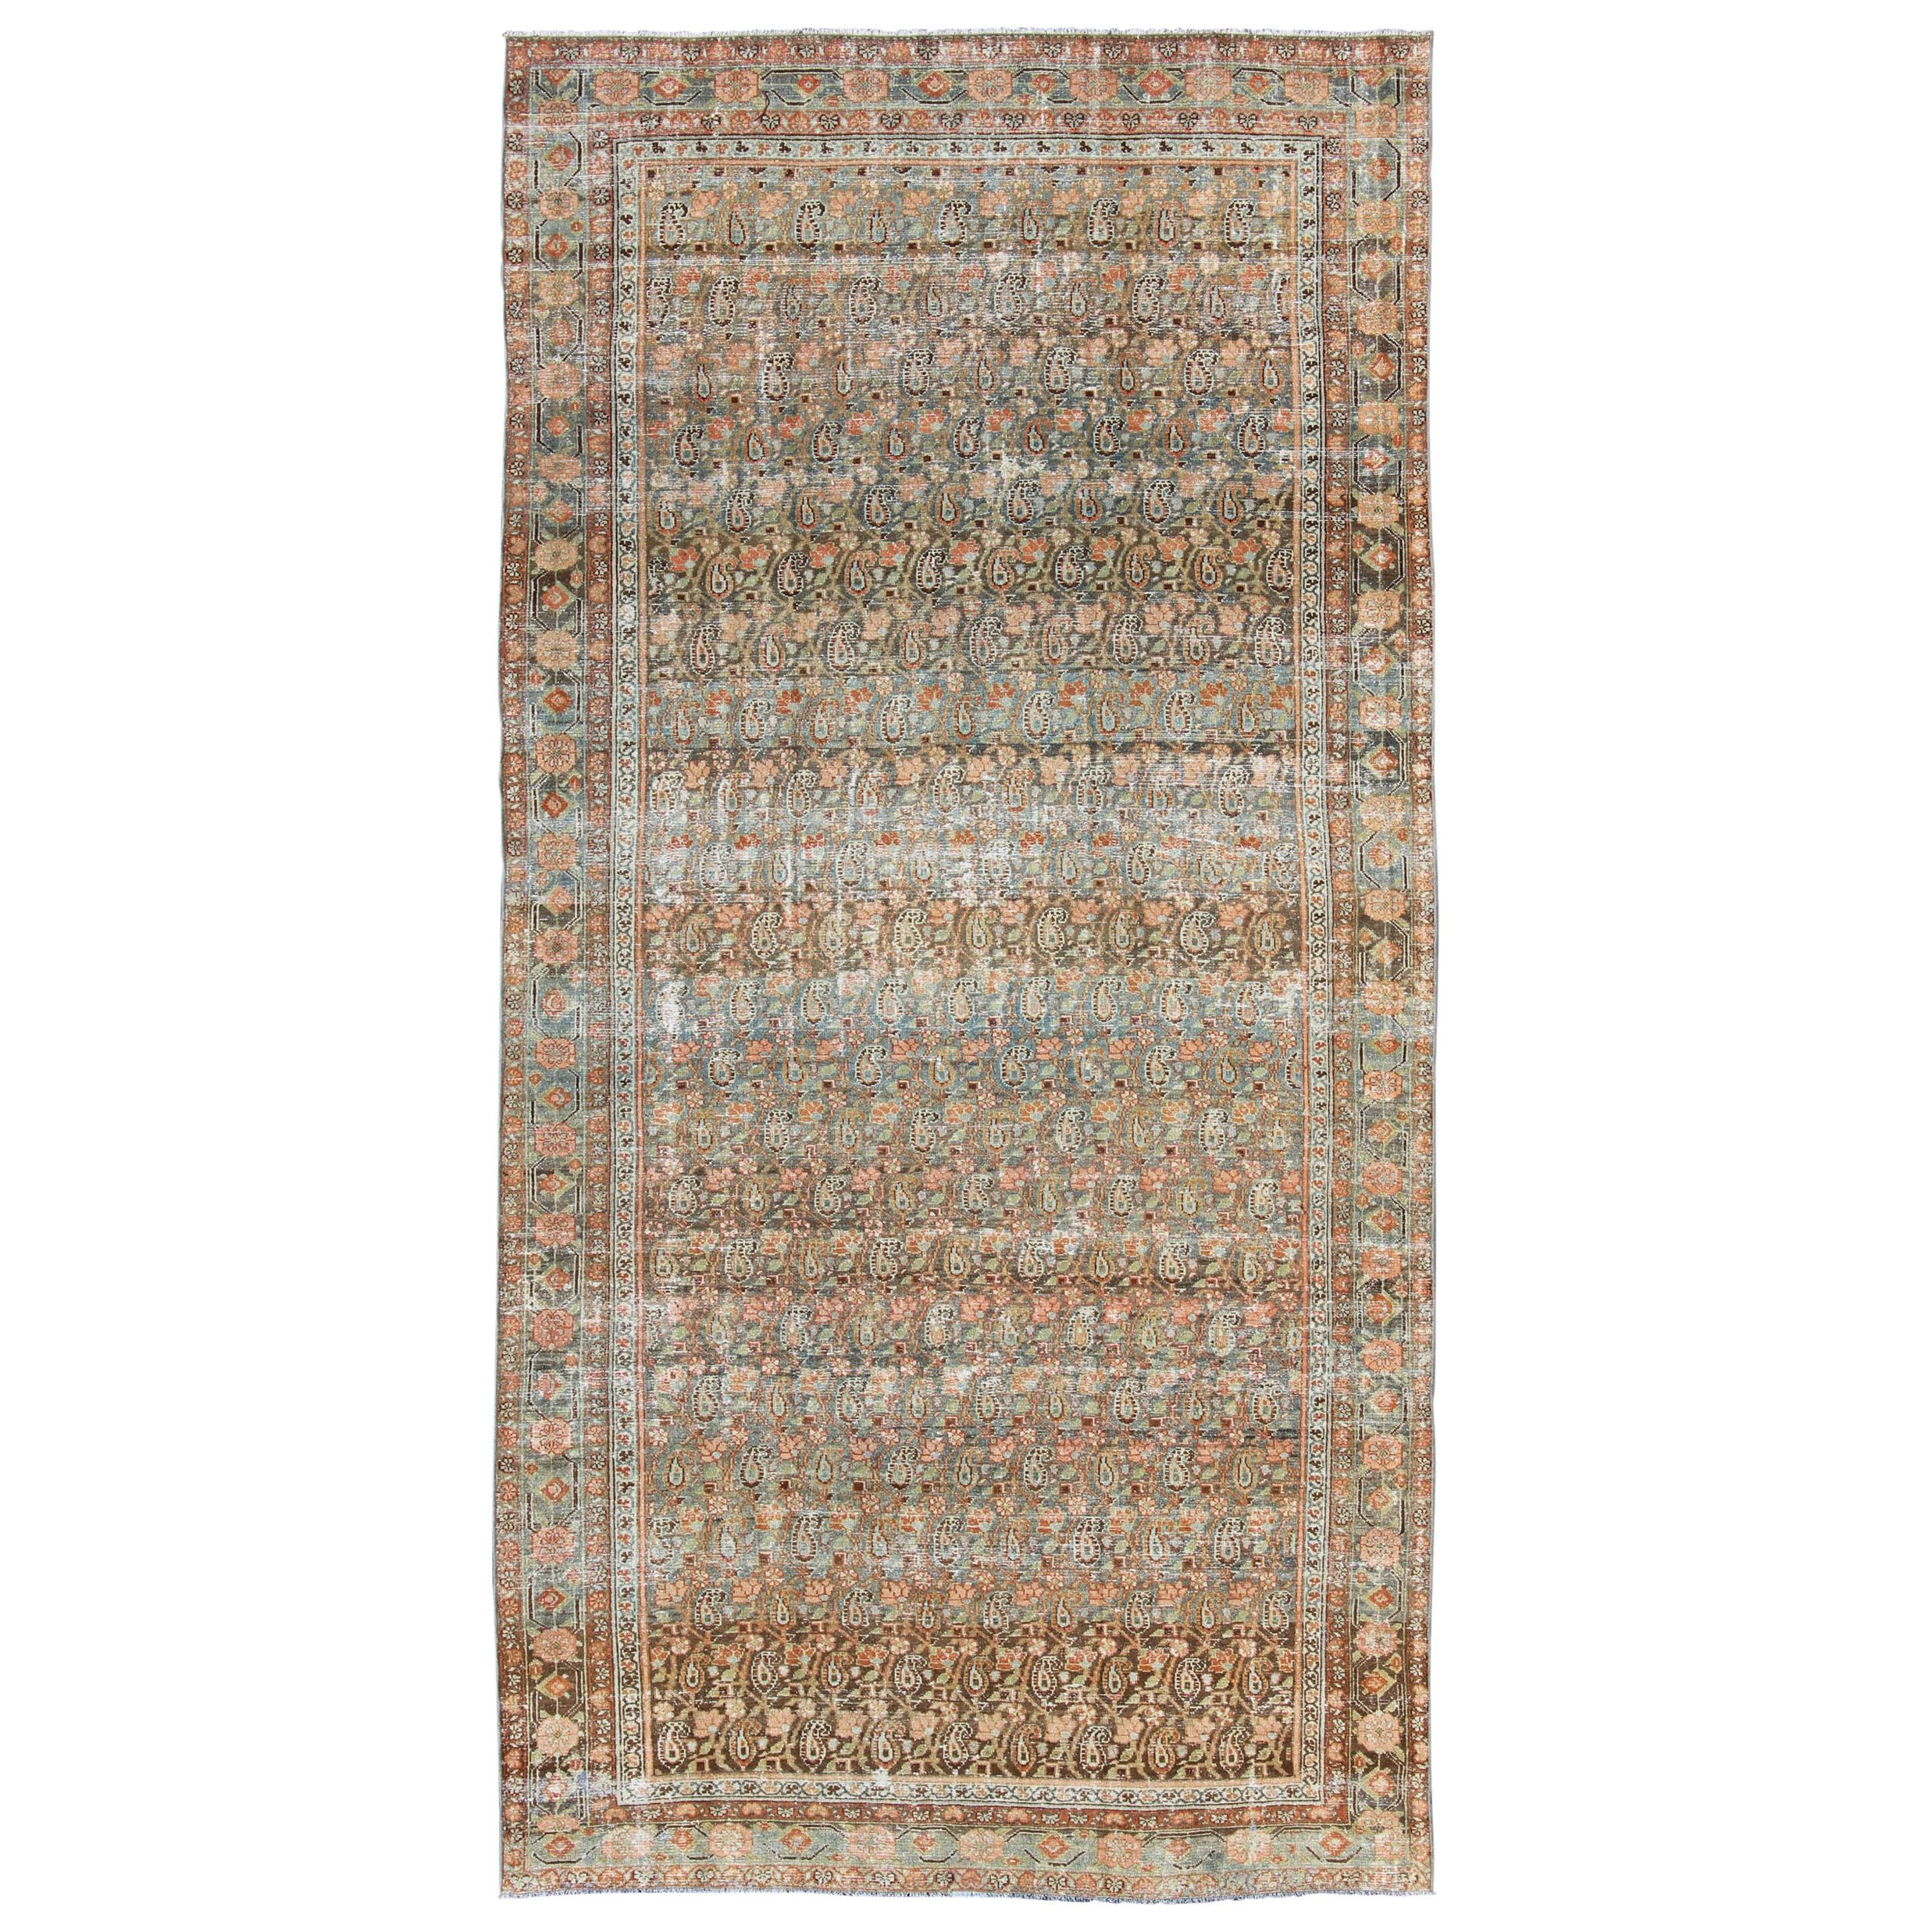 Gallery Persian Malayer with All-Over Geometric Design in Blue, Apricot, Green